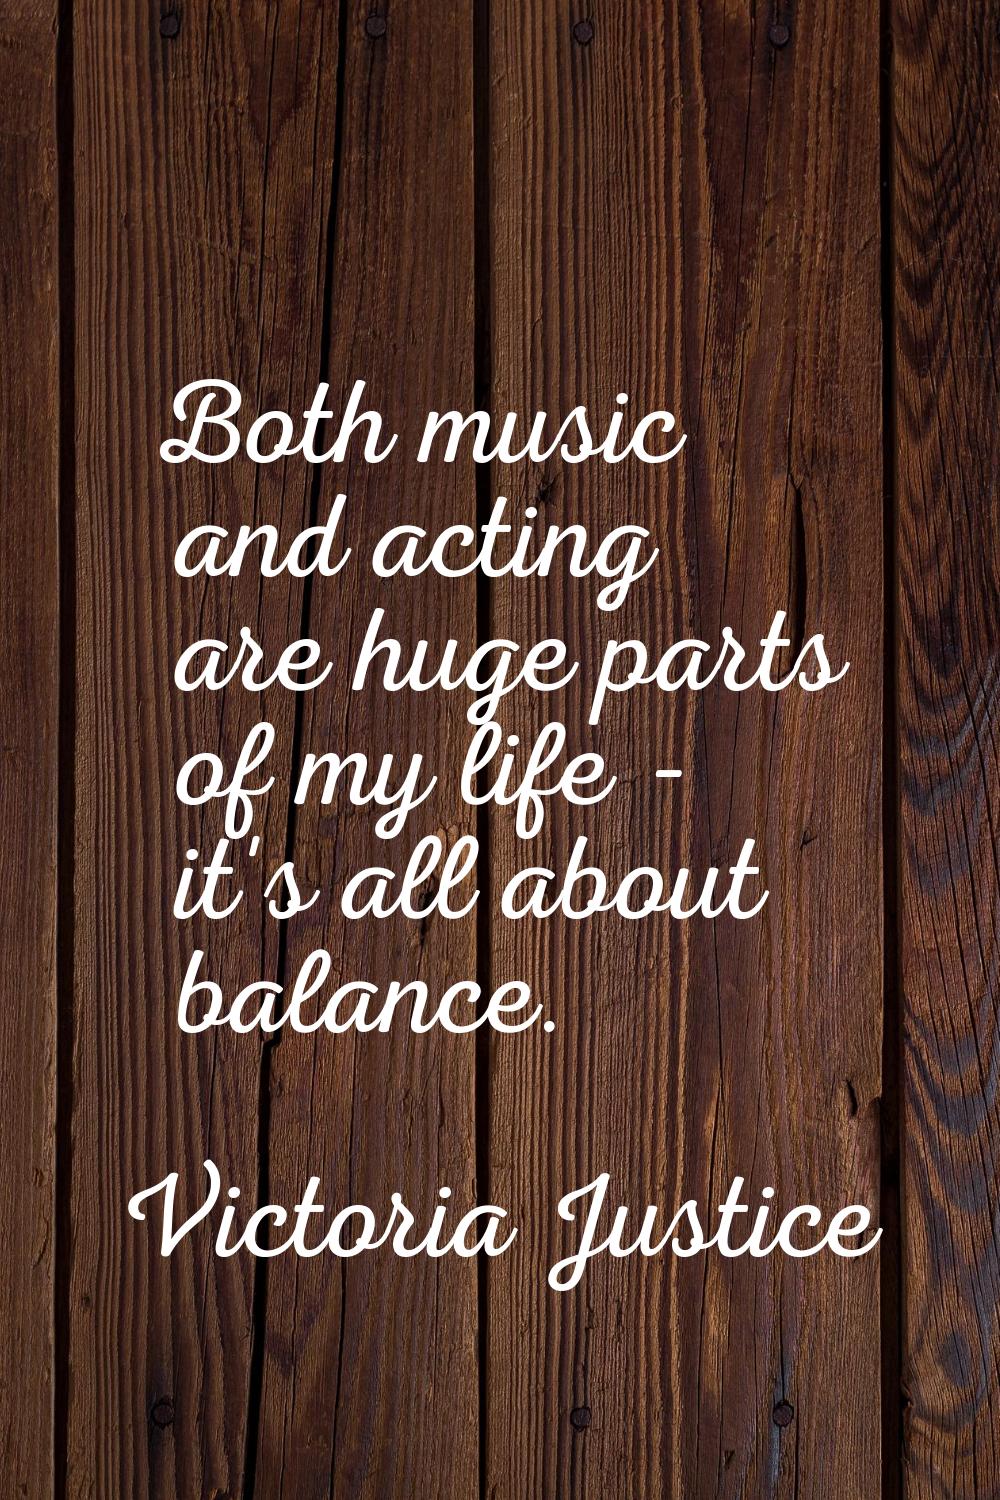 Both music and acting are huge parts of my life - it's all about balance.